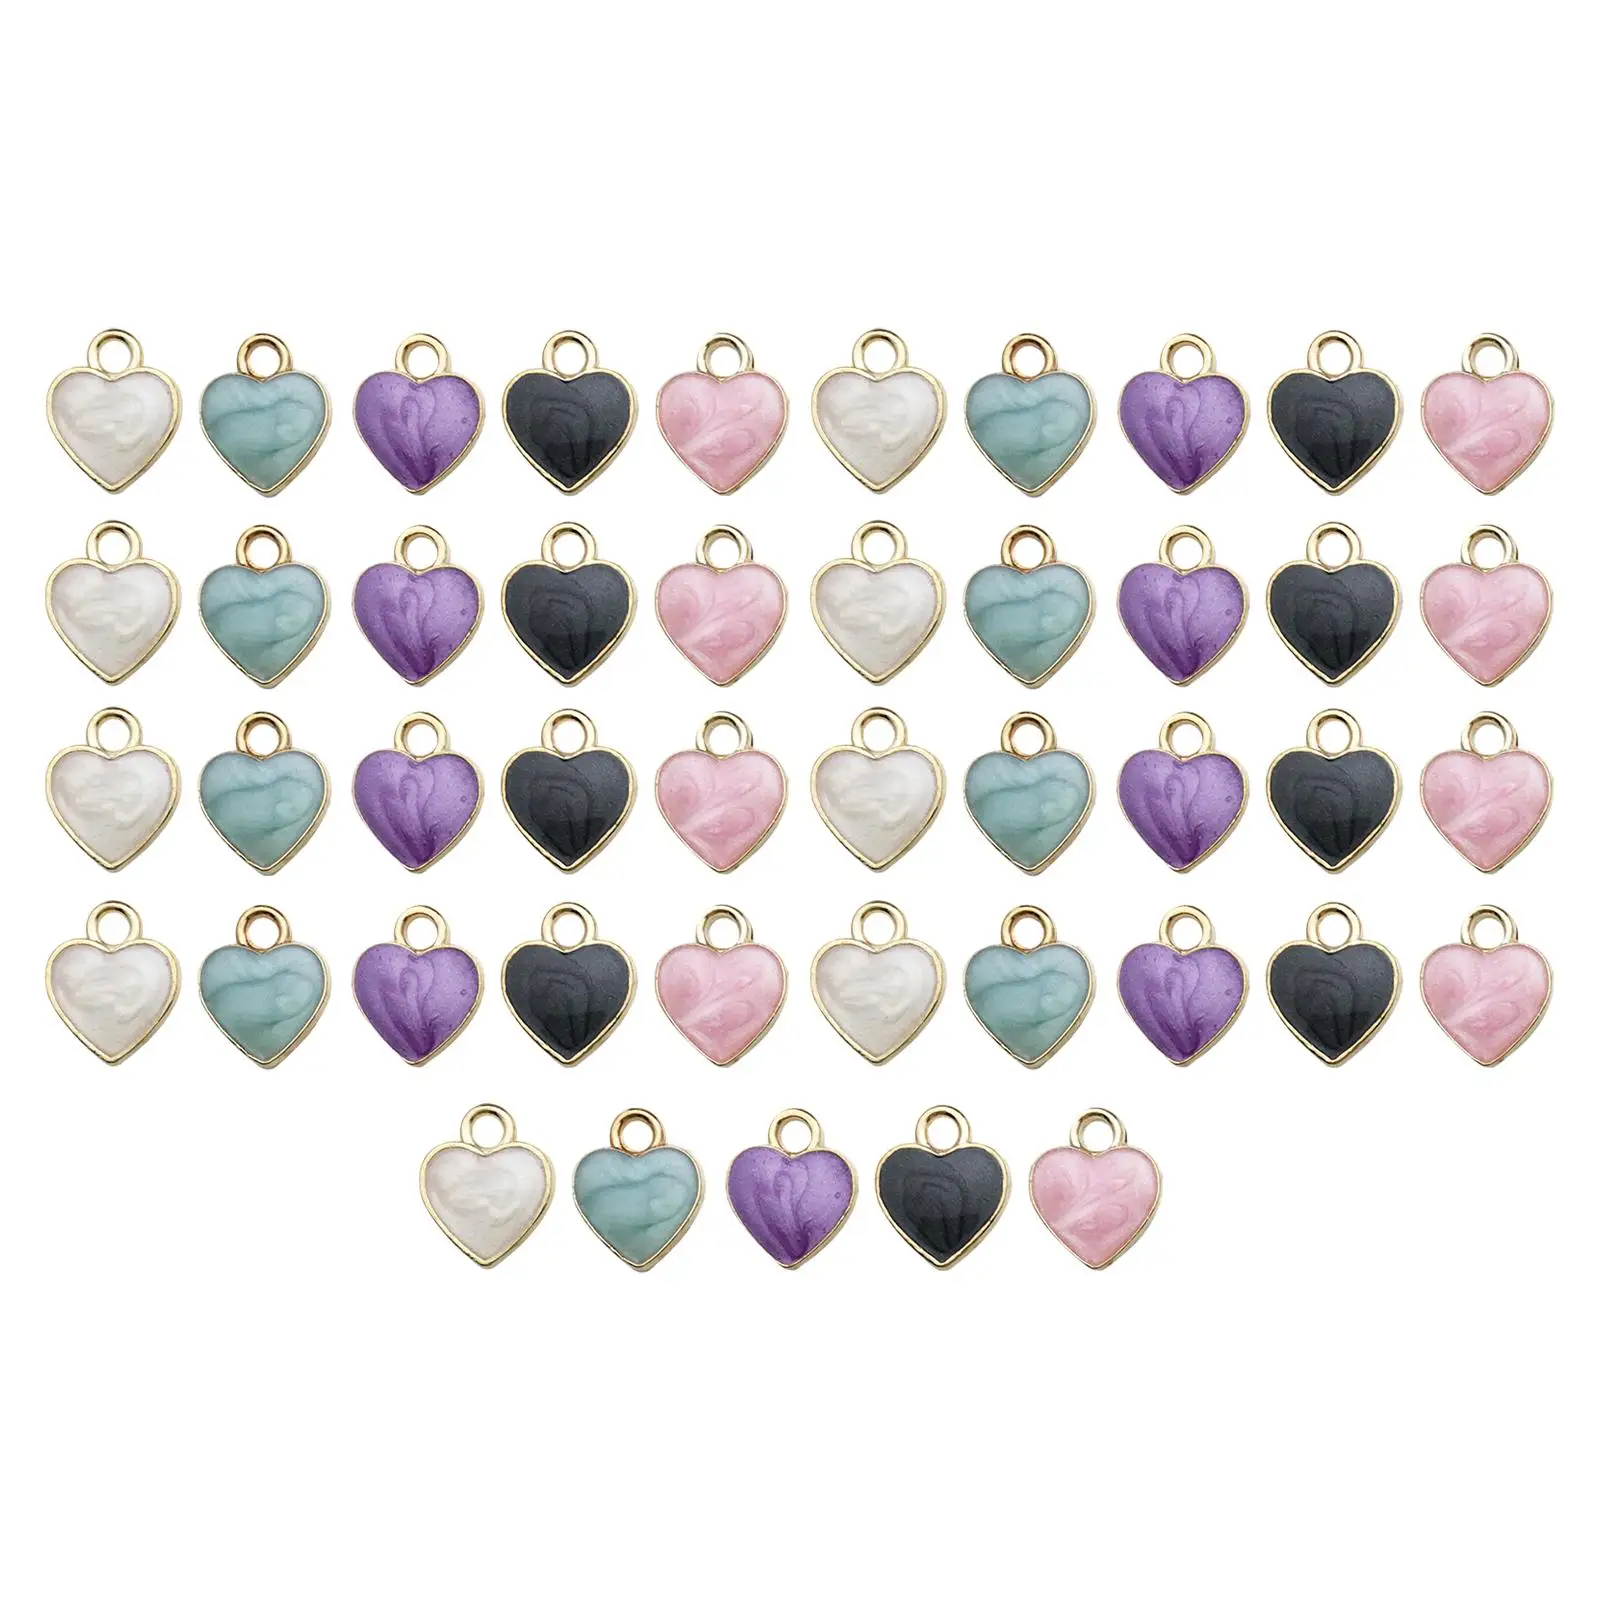 50x Heart Charms Jewelry Making Finding Necklace Bracelet Earring Mini Valentine`s Gifts for Teachers Toddlers Pets Mom Students